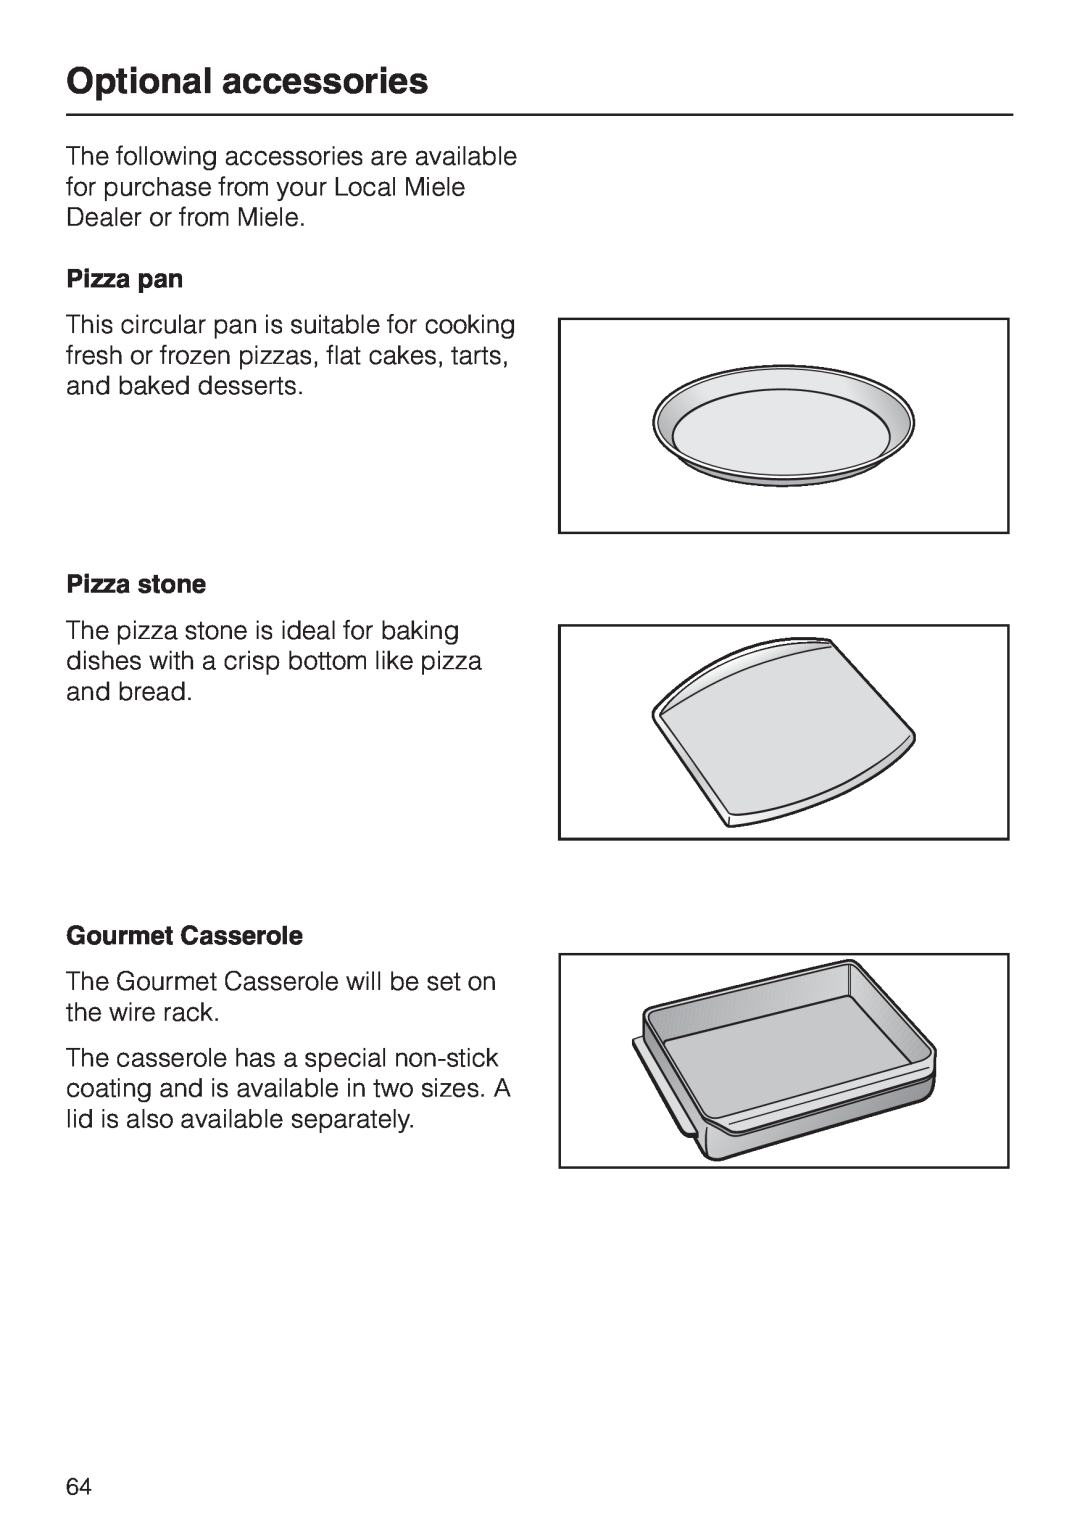 Miele H4780B installation instructions Optional accessories, Pizza pan, Pizza stone, Gourmet Casserole 